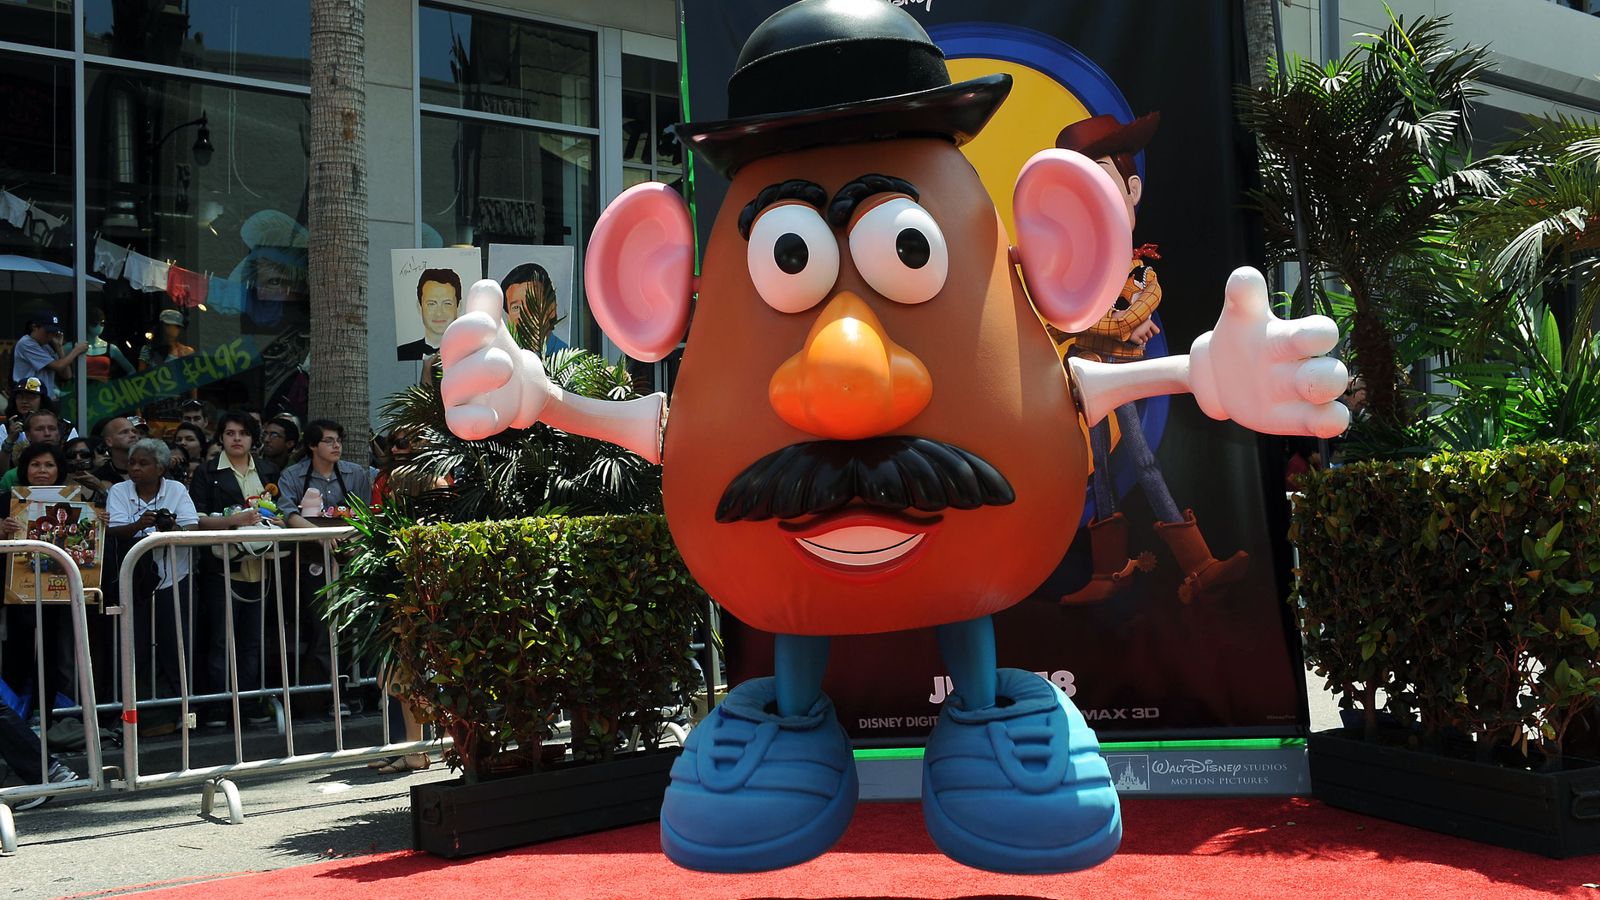 Spud of Steel' Potato Head shows up at local convenience store